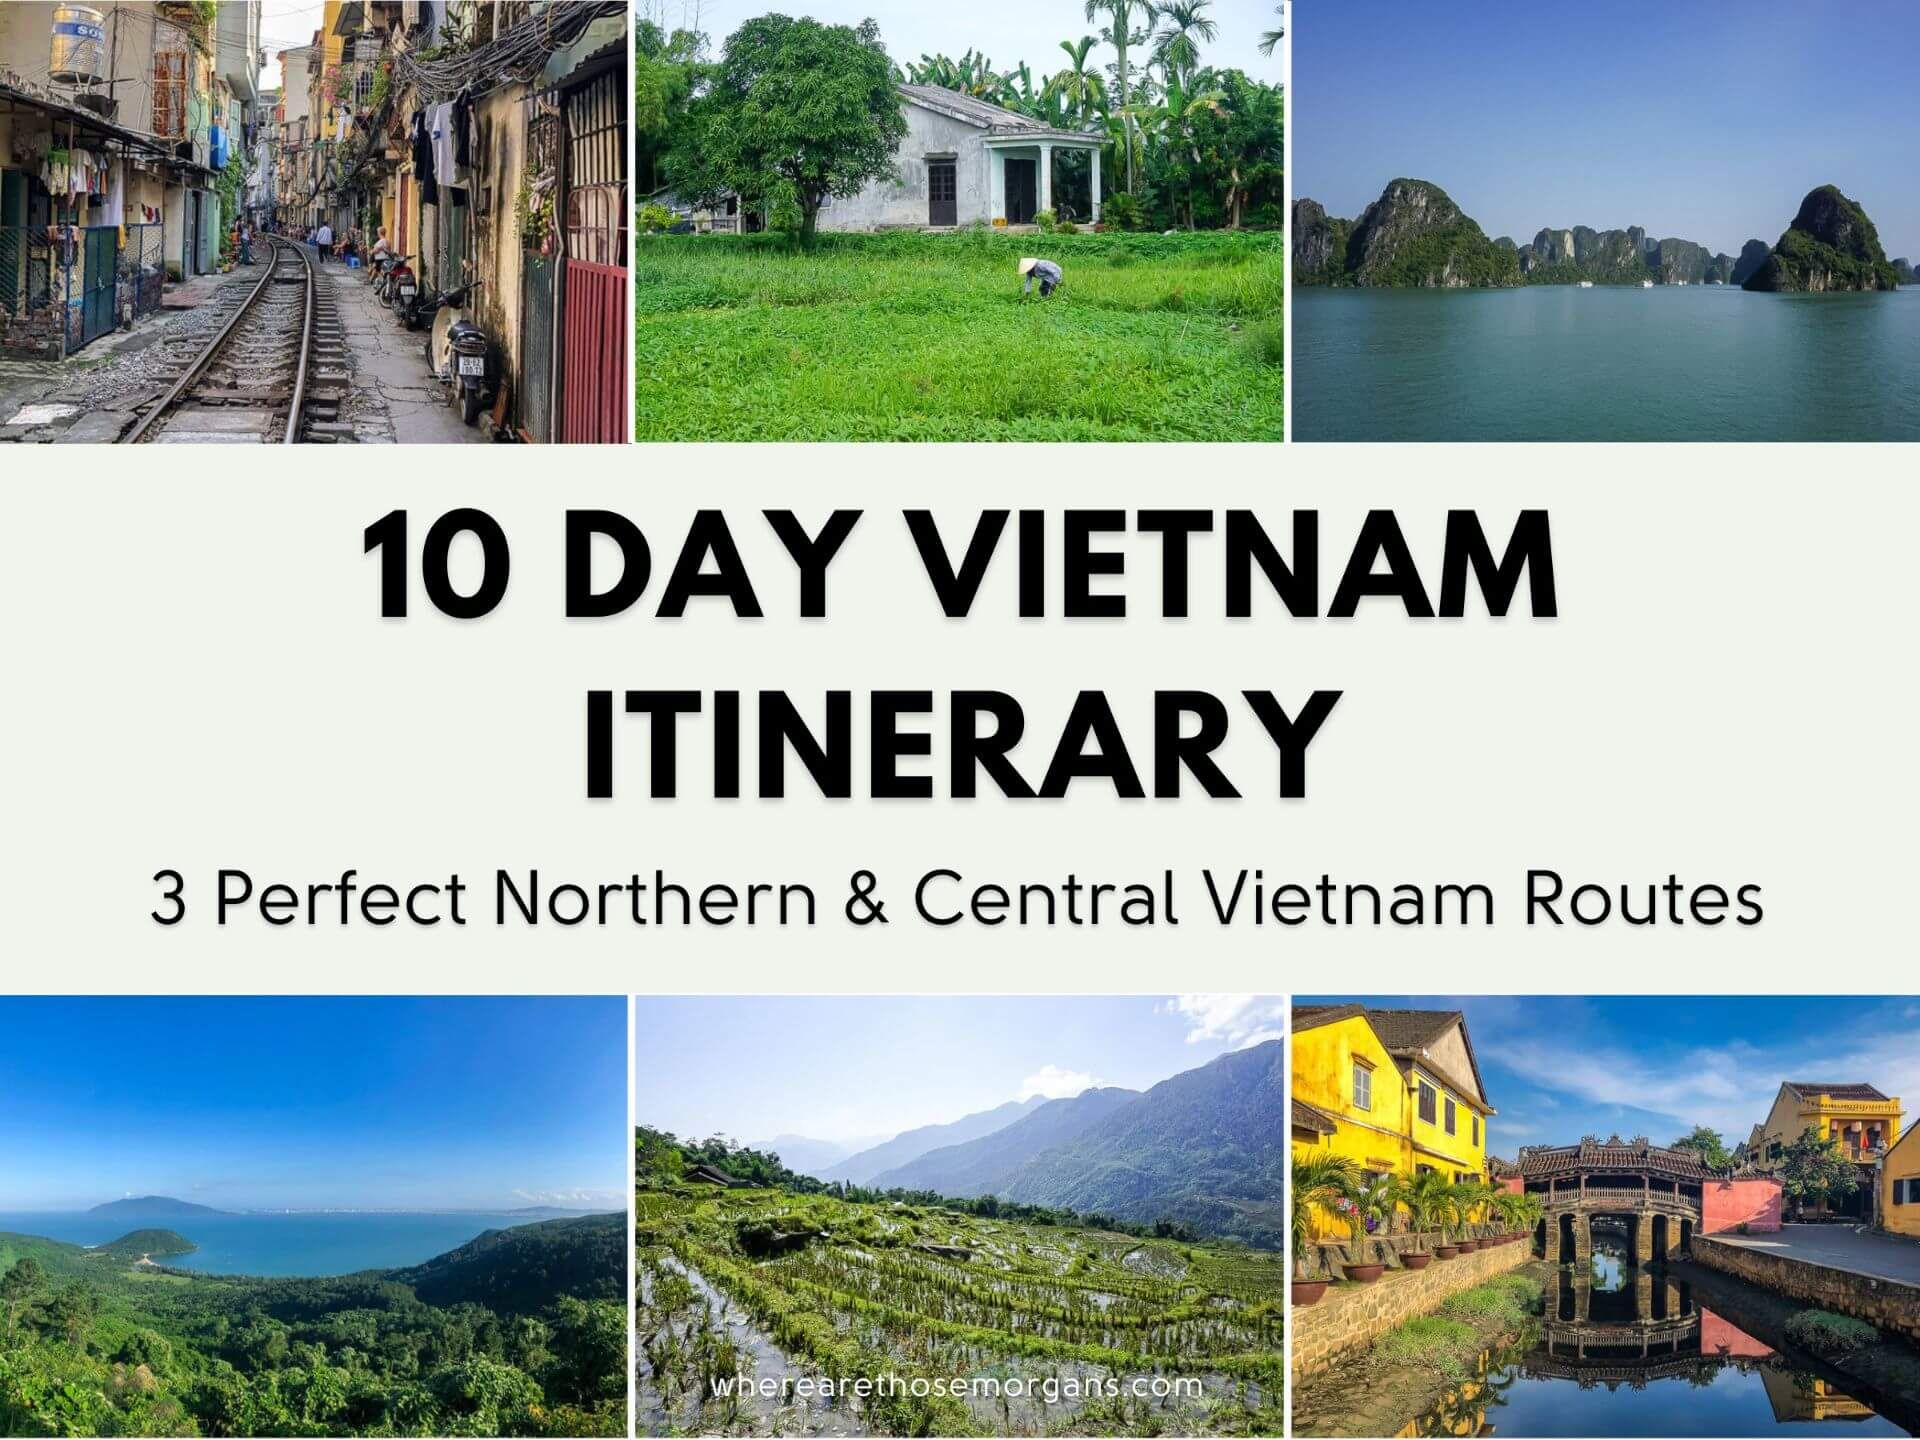 Vietnam Travel Guide Free Ebook - The Key for a Perfect Trip